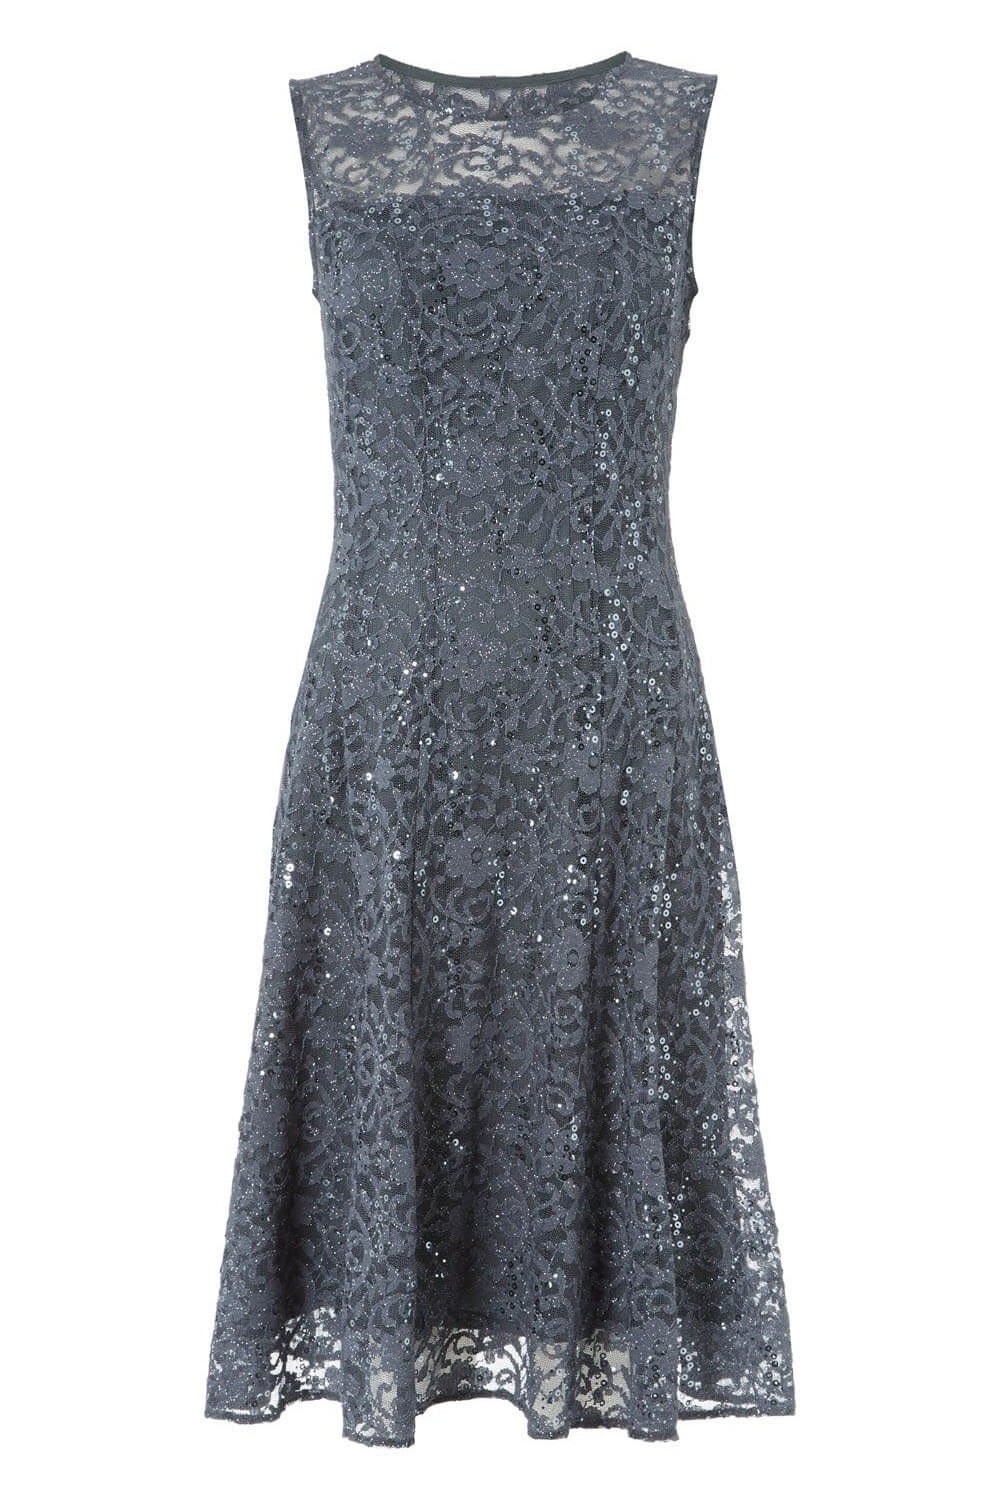 Grey Glitter and Sequin Lace Fit and Flare Dress, Image 5 of 5